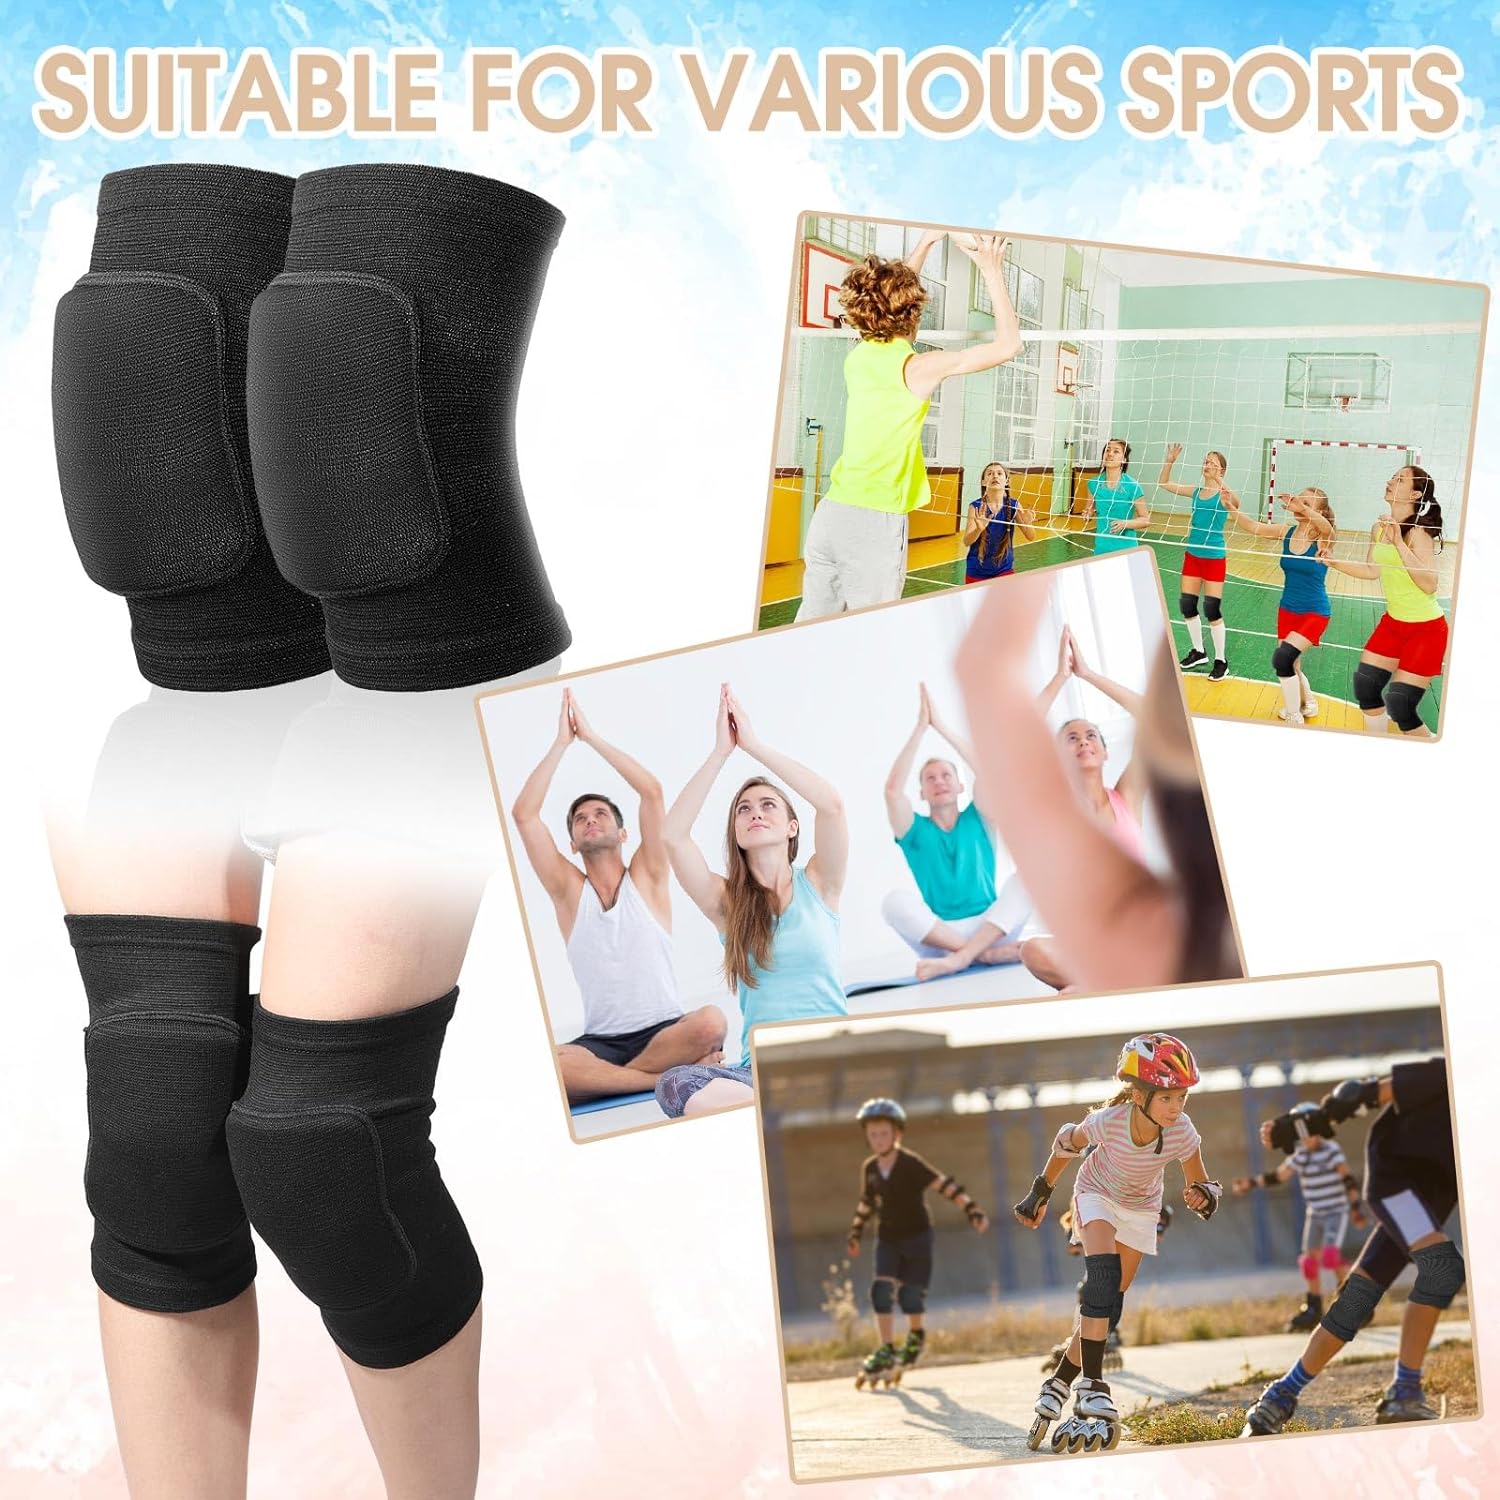 Yunsailing 6 Pairs Knee Pads for Women Men, Soft Breathable Volleyball Knee Pads Tactical Knee Pads Knee Protector Workout Knee Pads for Basketball Football Hockey Dance Running (Black,S Size)